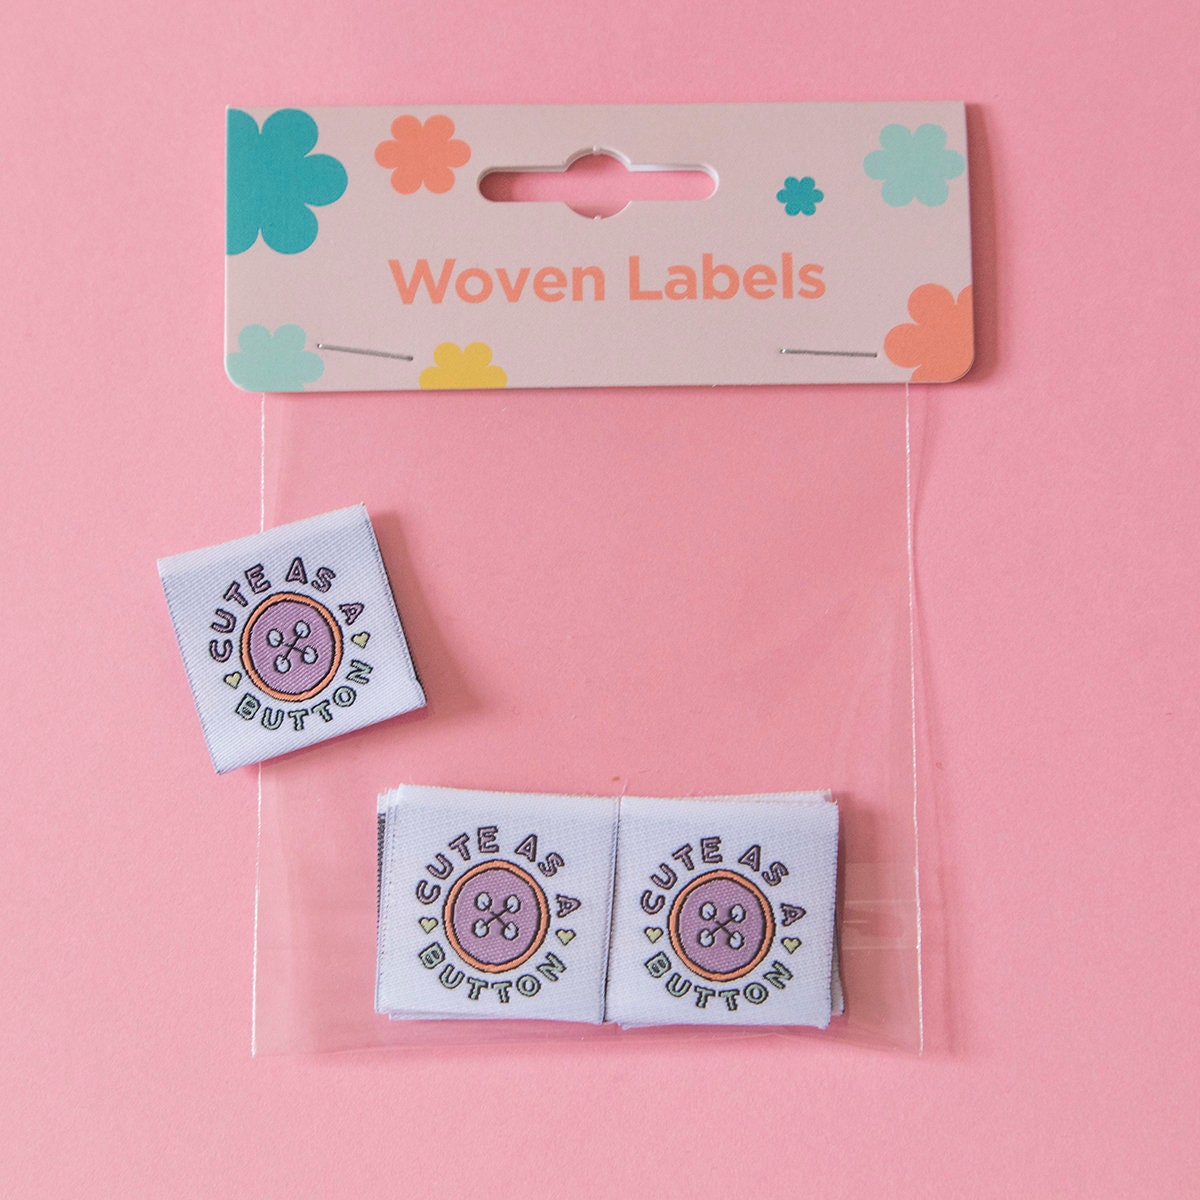 Handmade by Labels knitting, Crochet, or Sewing Labels Customizable for  Handmade Items, Organic Cotton 